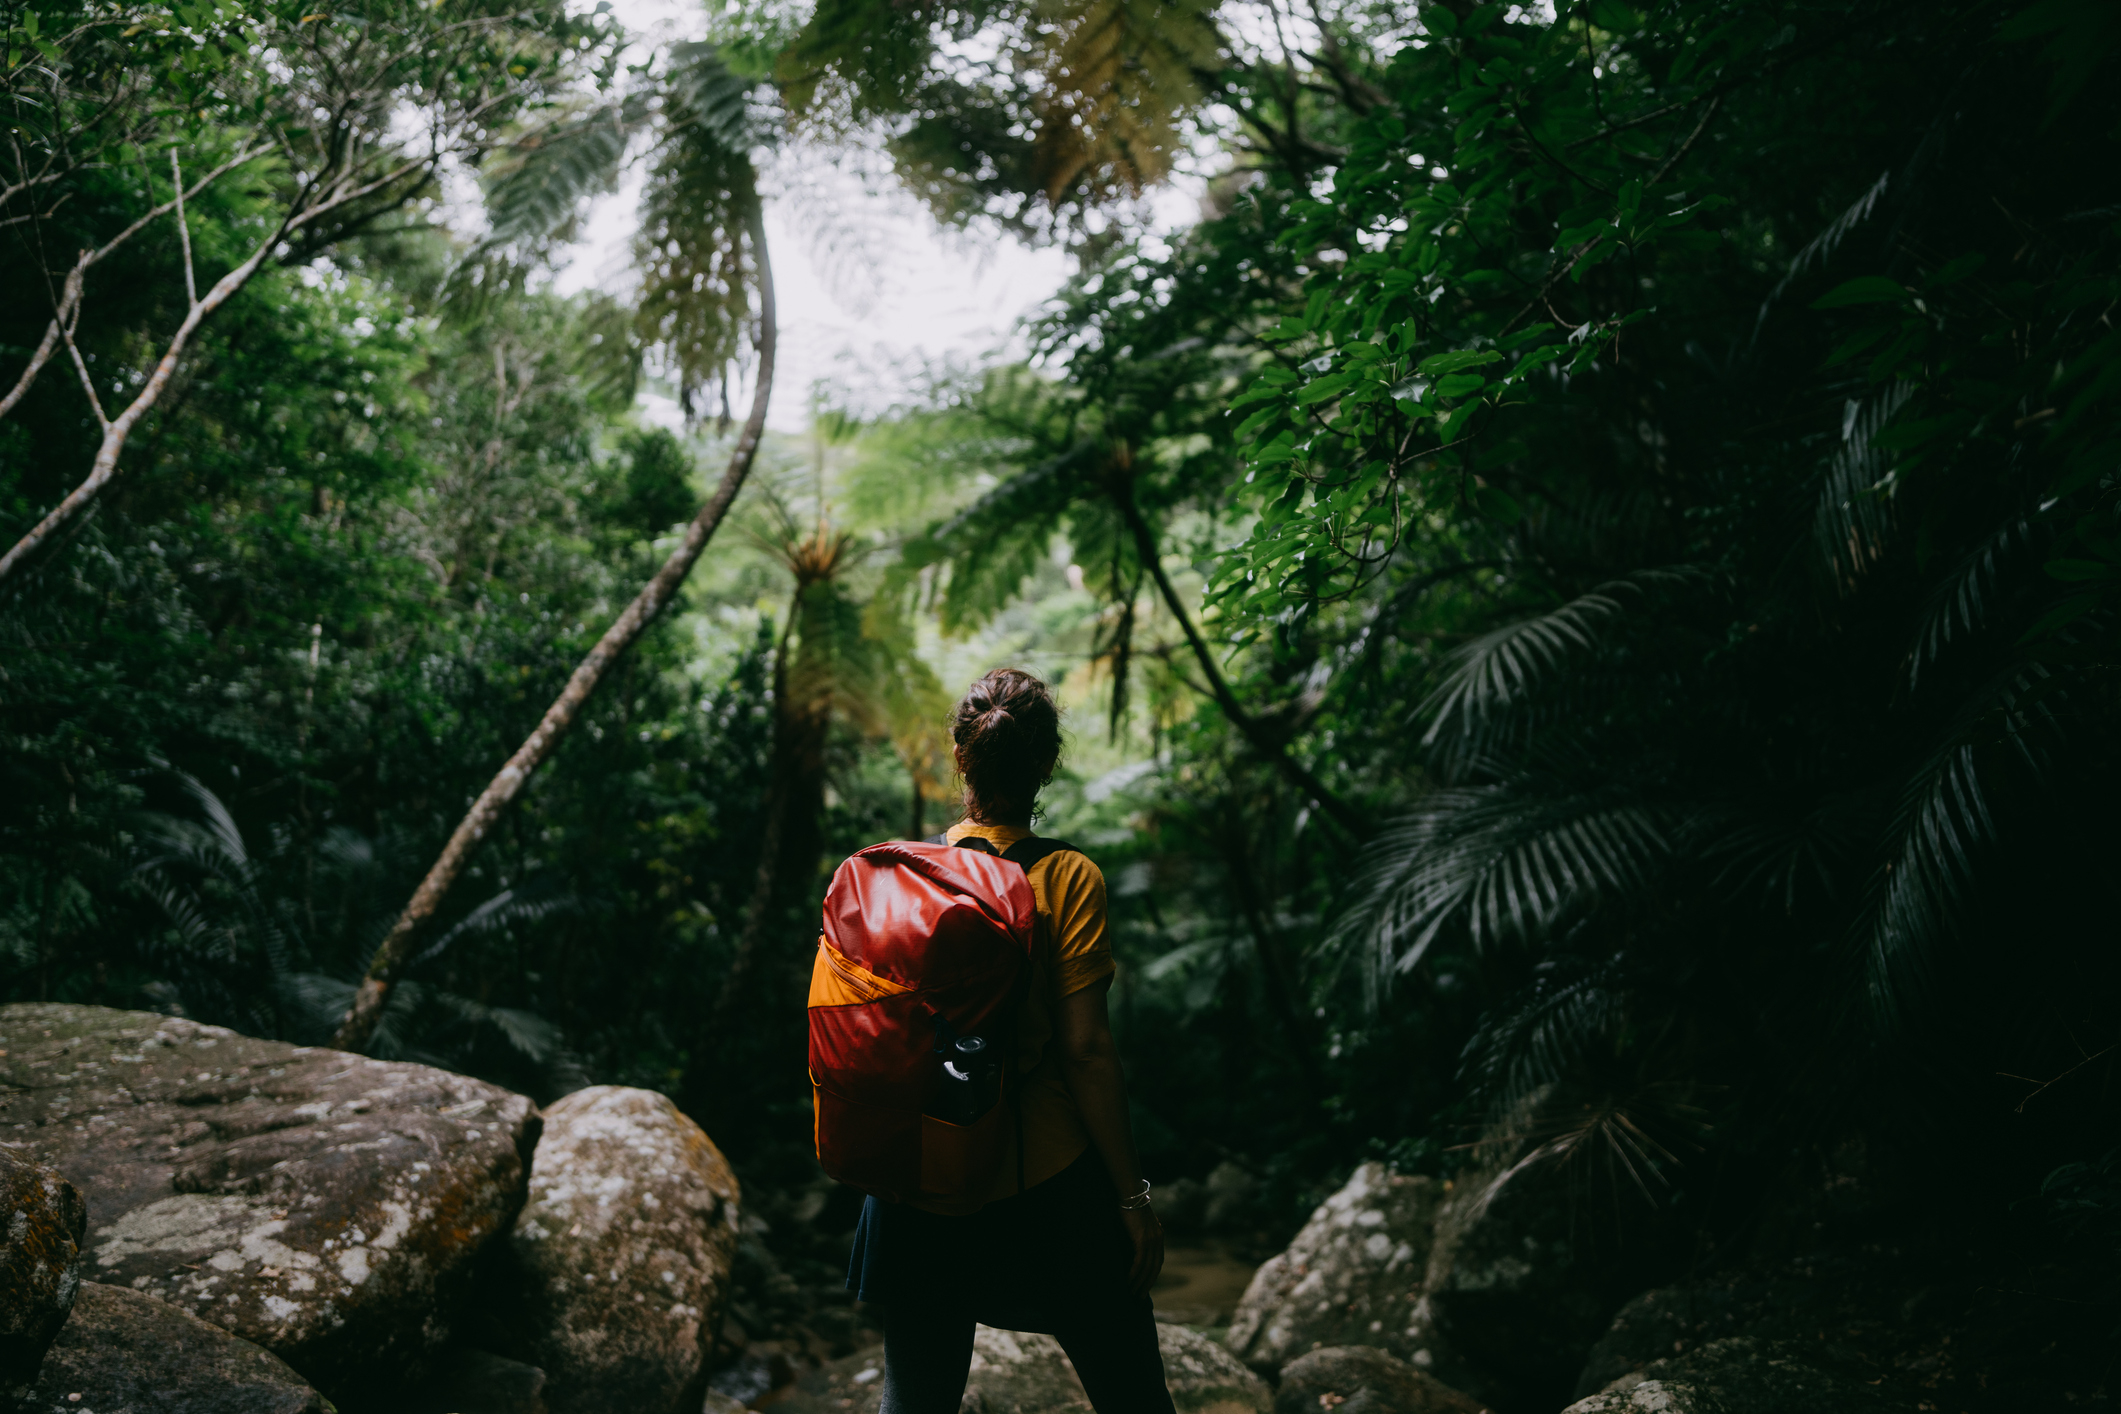 A solo traveler is in the middle of a tropical forest